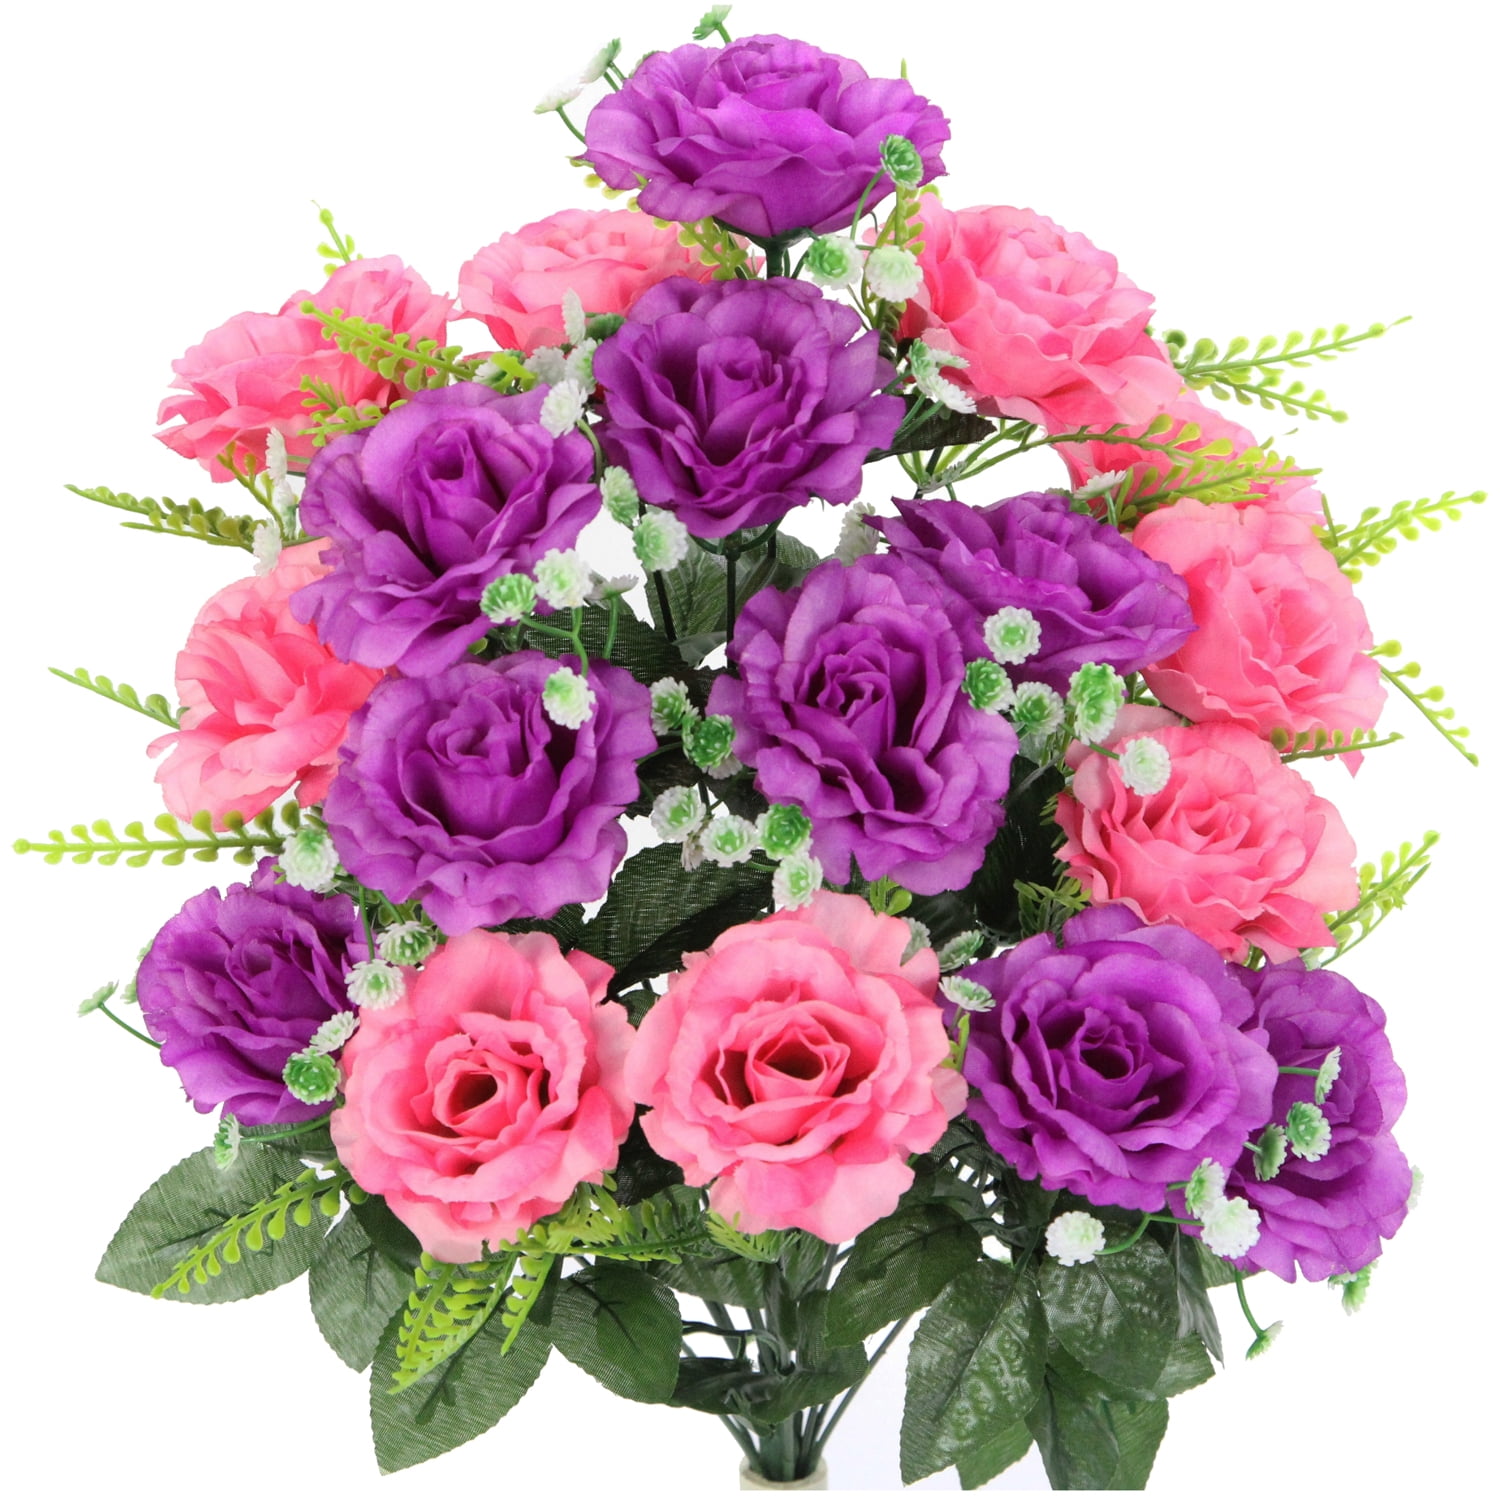 Admired By Nature 18 Stems Artificial Full Blooming Rose with Greenery ...